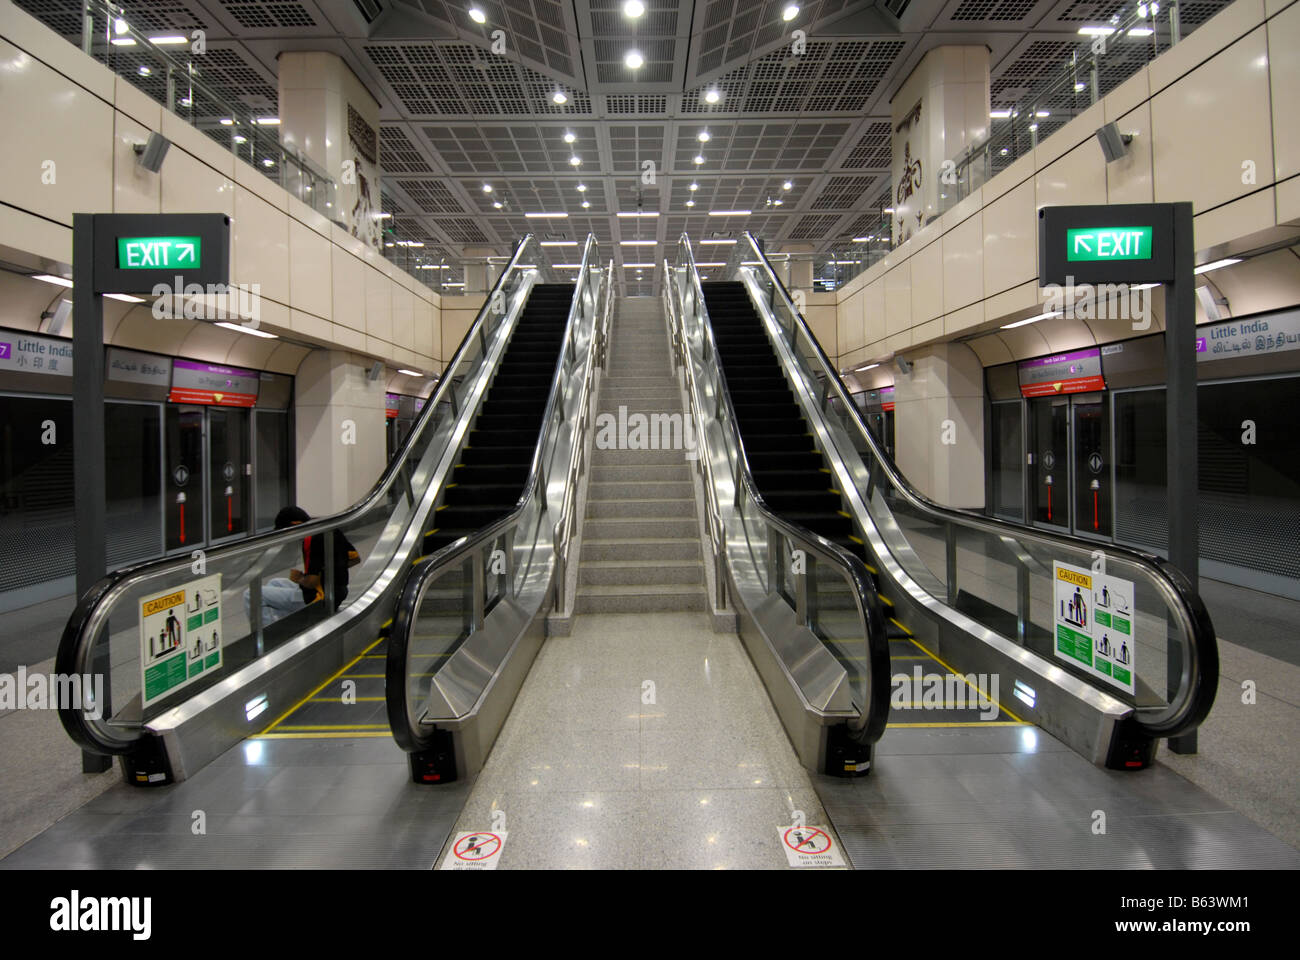 A MASS RAPID TRANSIT STATION IN SINGAPORE Stock Photo